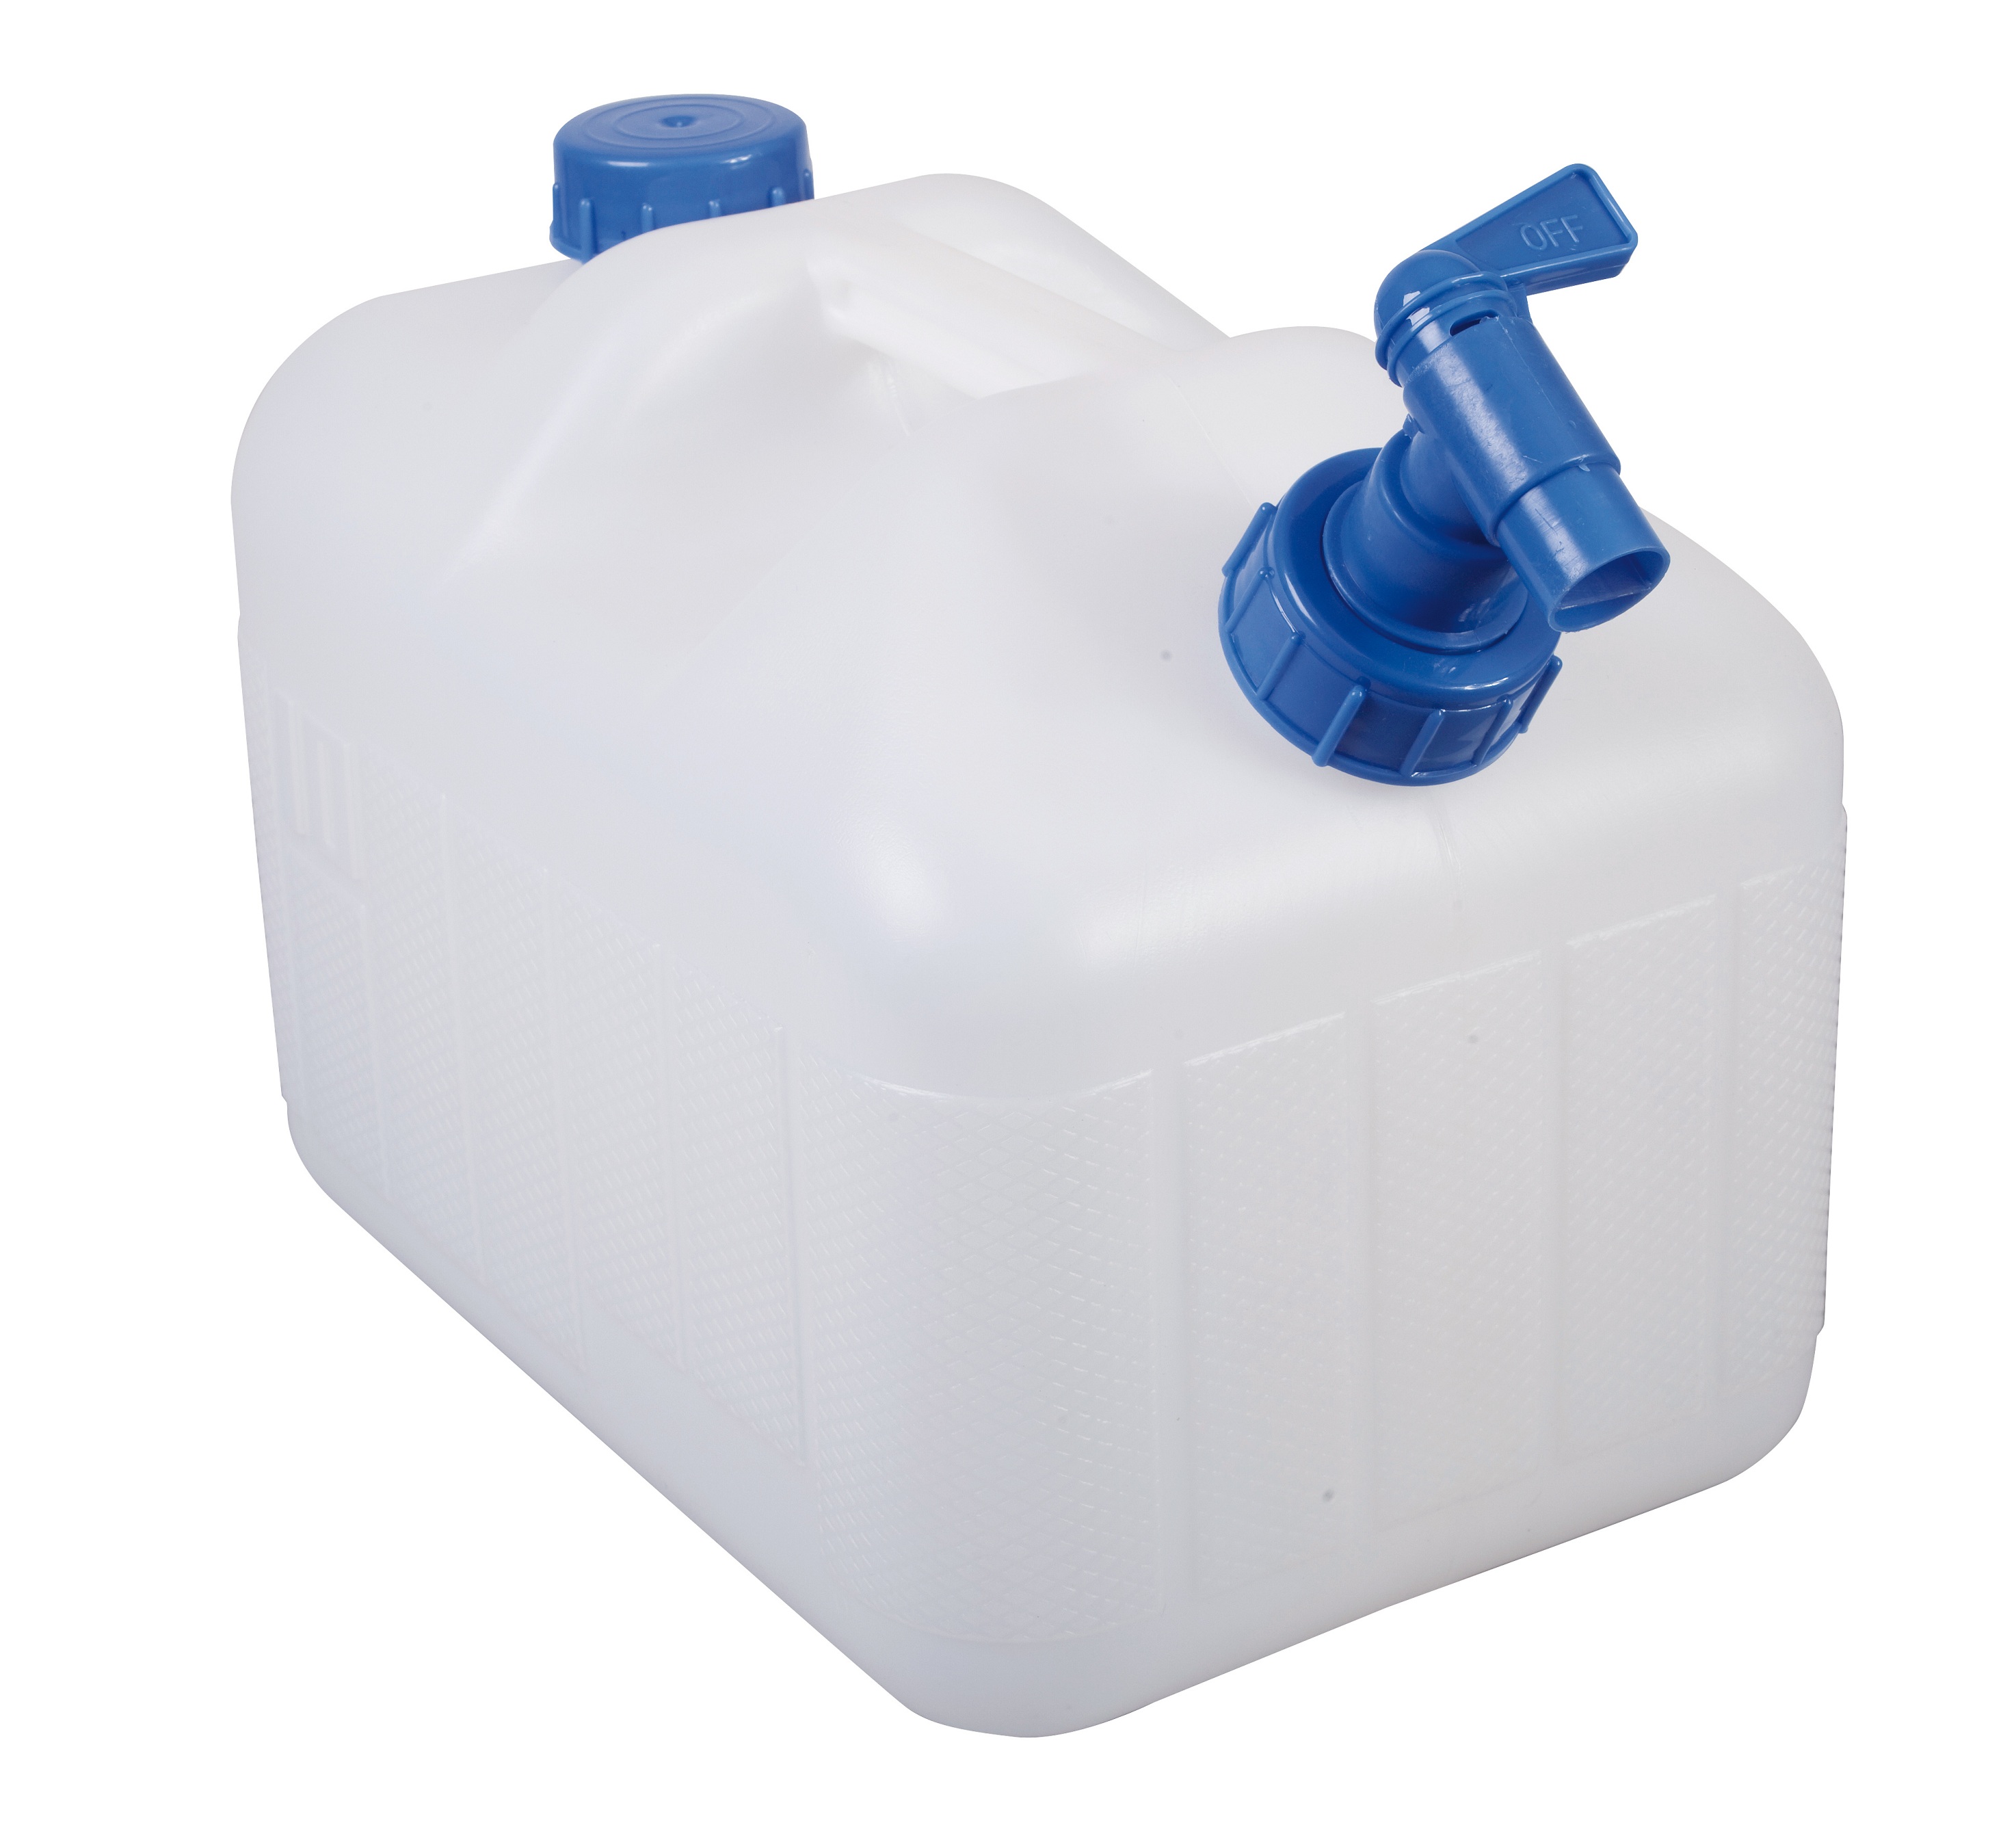 10 Litre Plastic Water Jerry Can Carrier Container Storage With Pouring Tap 